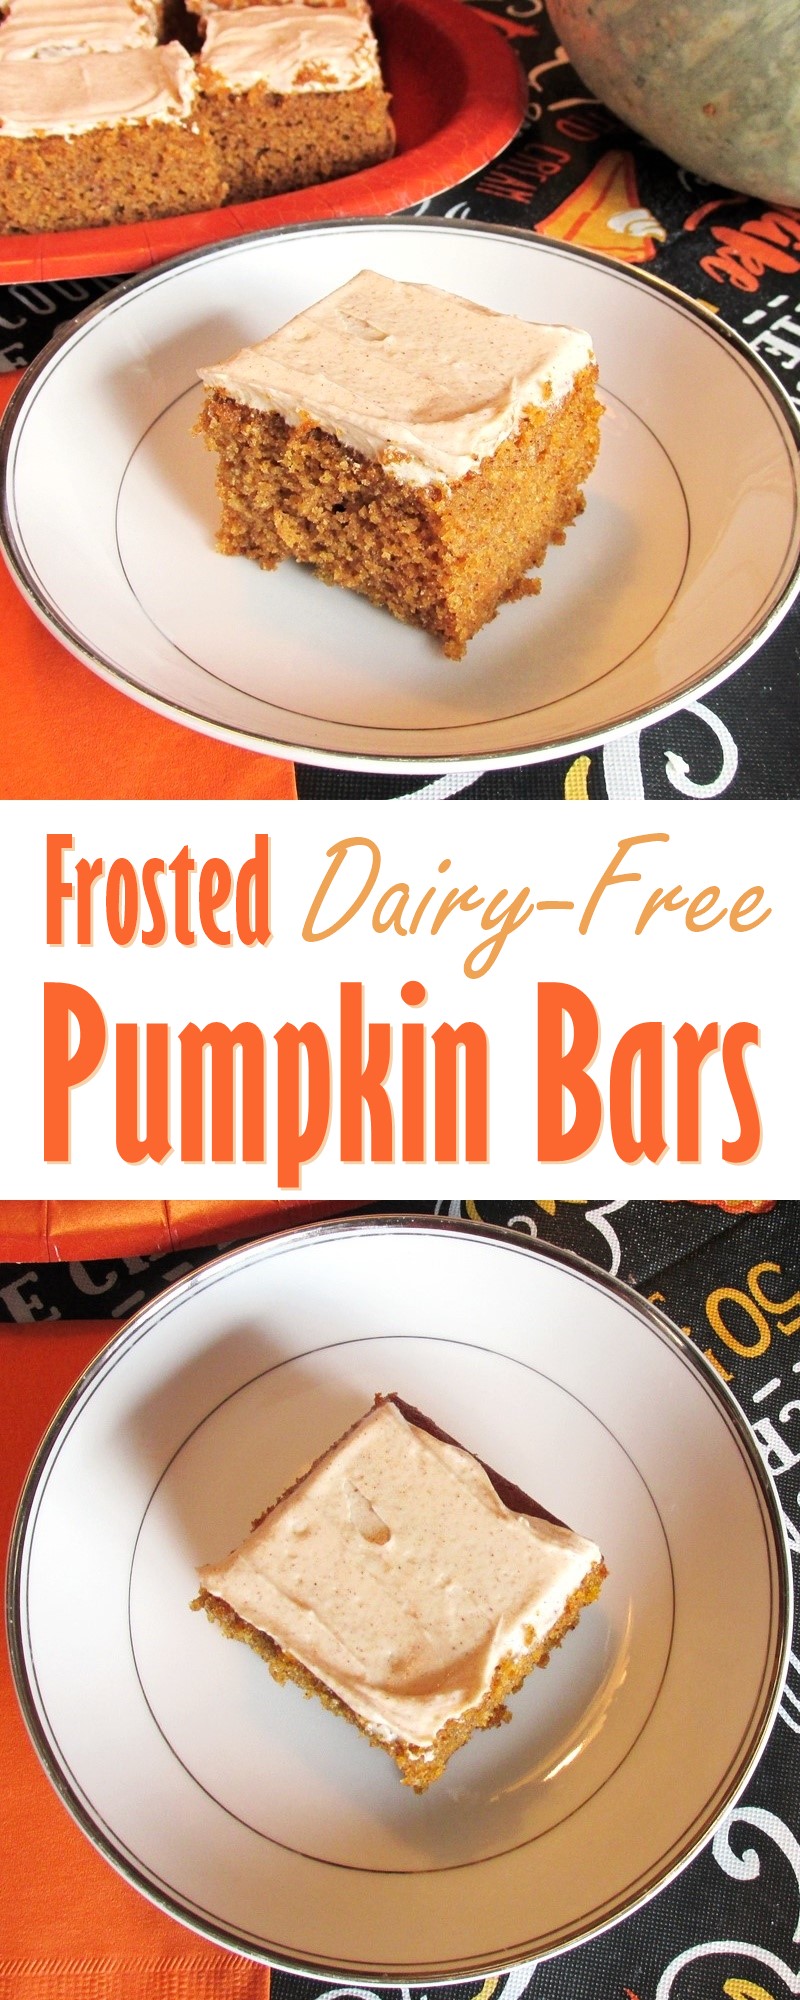 Dairy-Free Frosted Pumpkin Bars Recipe with Spiced Buttercream (nut-free and soy-free, too!)